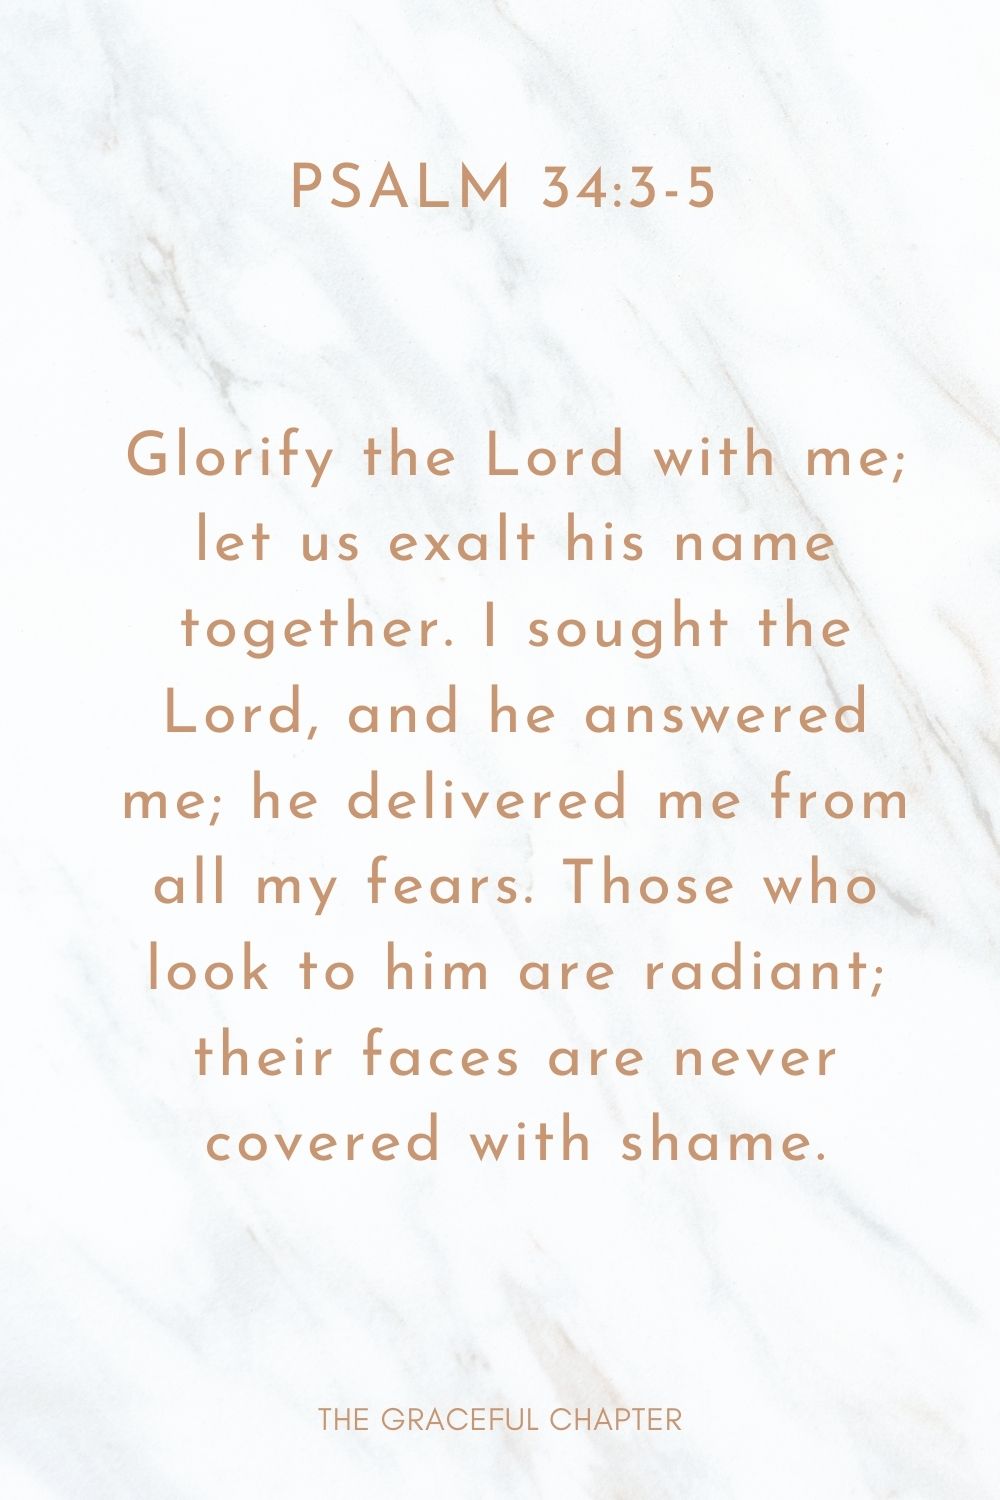 Glorify the Lord with me; let us exalt his name together. I sought the Lord, and he answered me; he delivered me from all my fears. Those who look to him are radiant; their faces are never covered with shame. Psalm 34:3-5